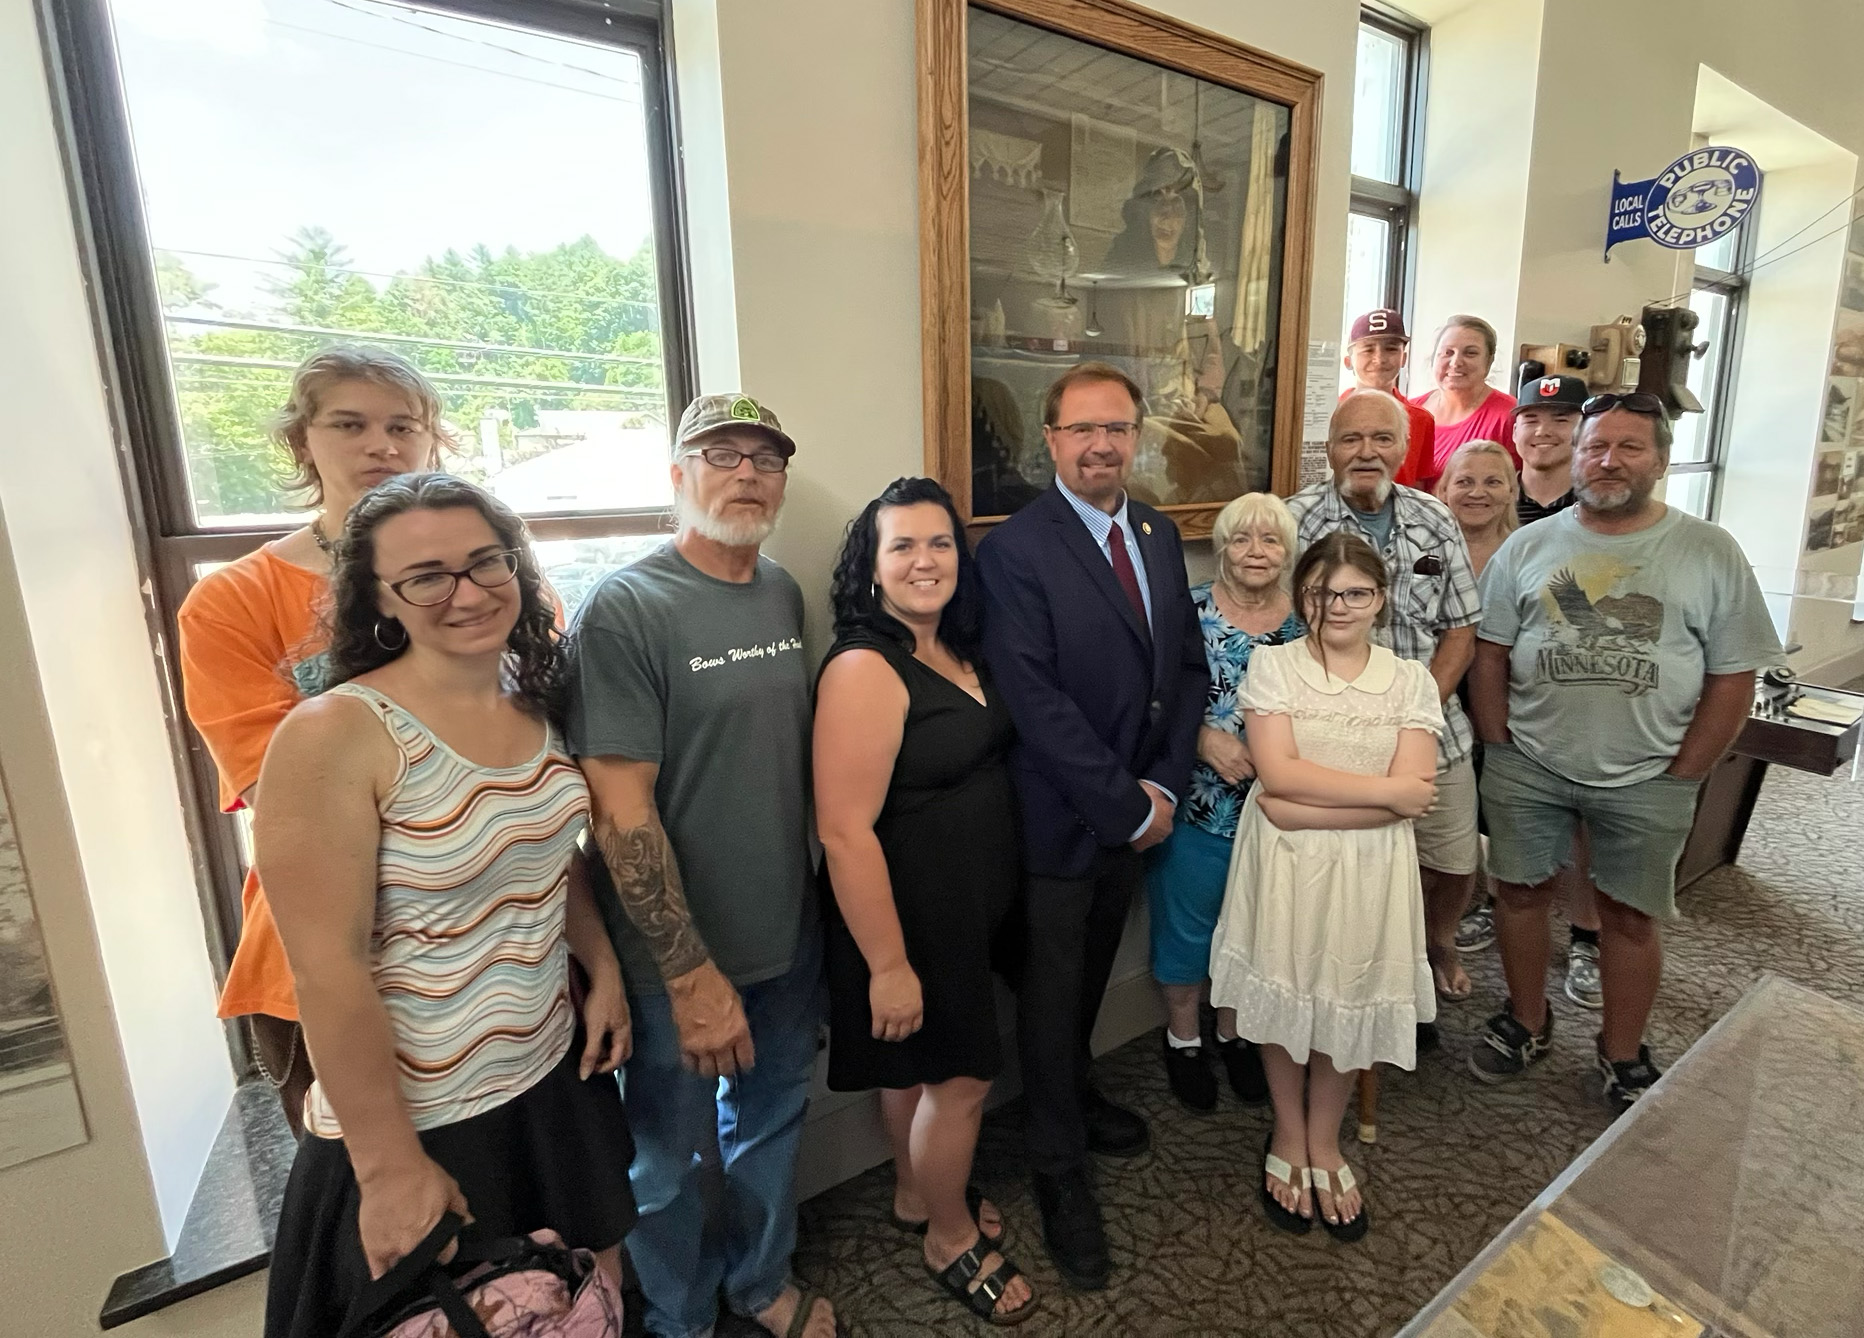 Members of the Winchester family are pictured at the Swain Heritage Museum with Congressman Chuck Edwards in front of the portrait titled "Matriarch of the Smokies" depicting Mary Magdaline Ridley Winchester that is on loan from the National Park Service.  Lake Silver/Special to SMT